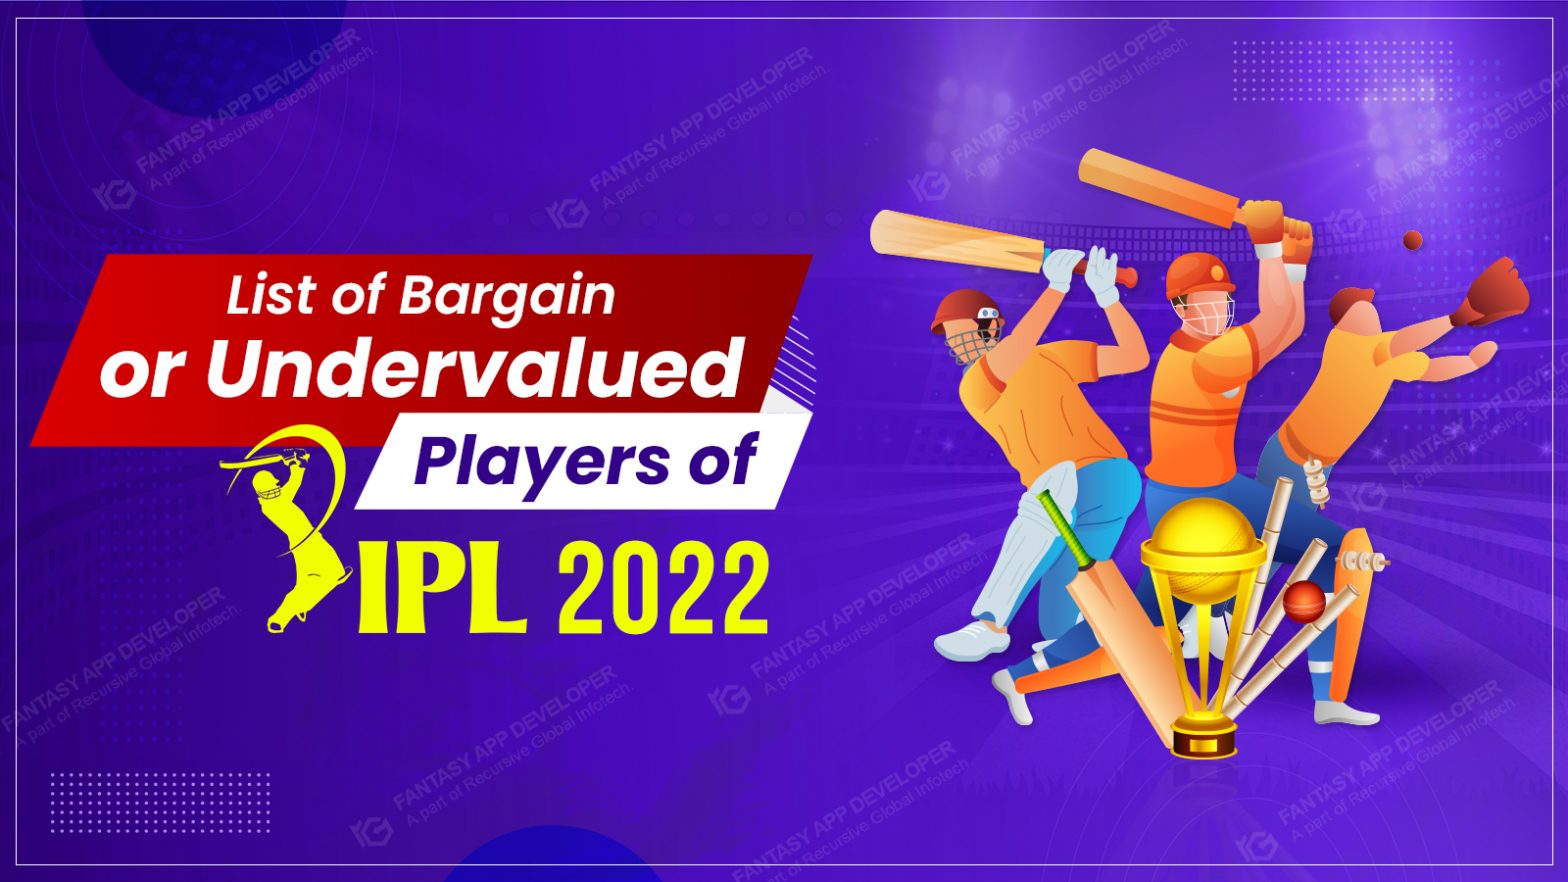 ist of Bargain or Undervalued Players of IPL 2022